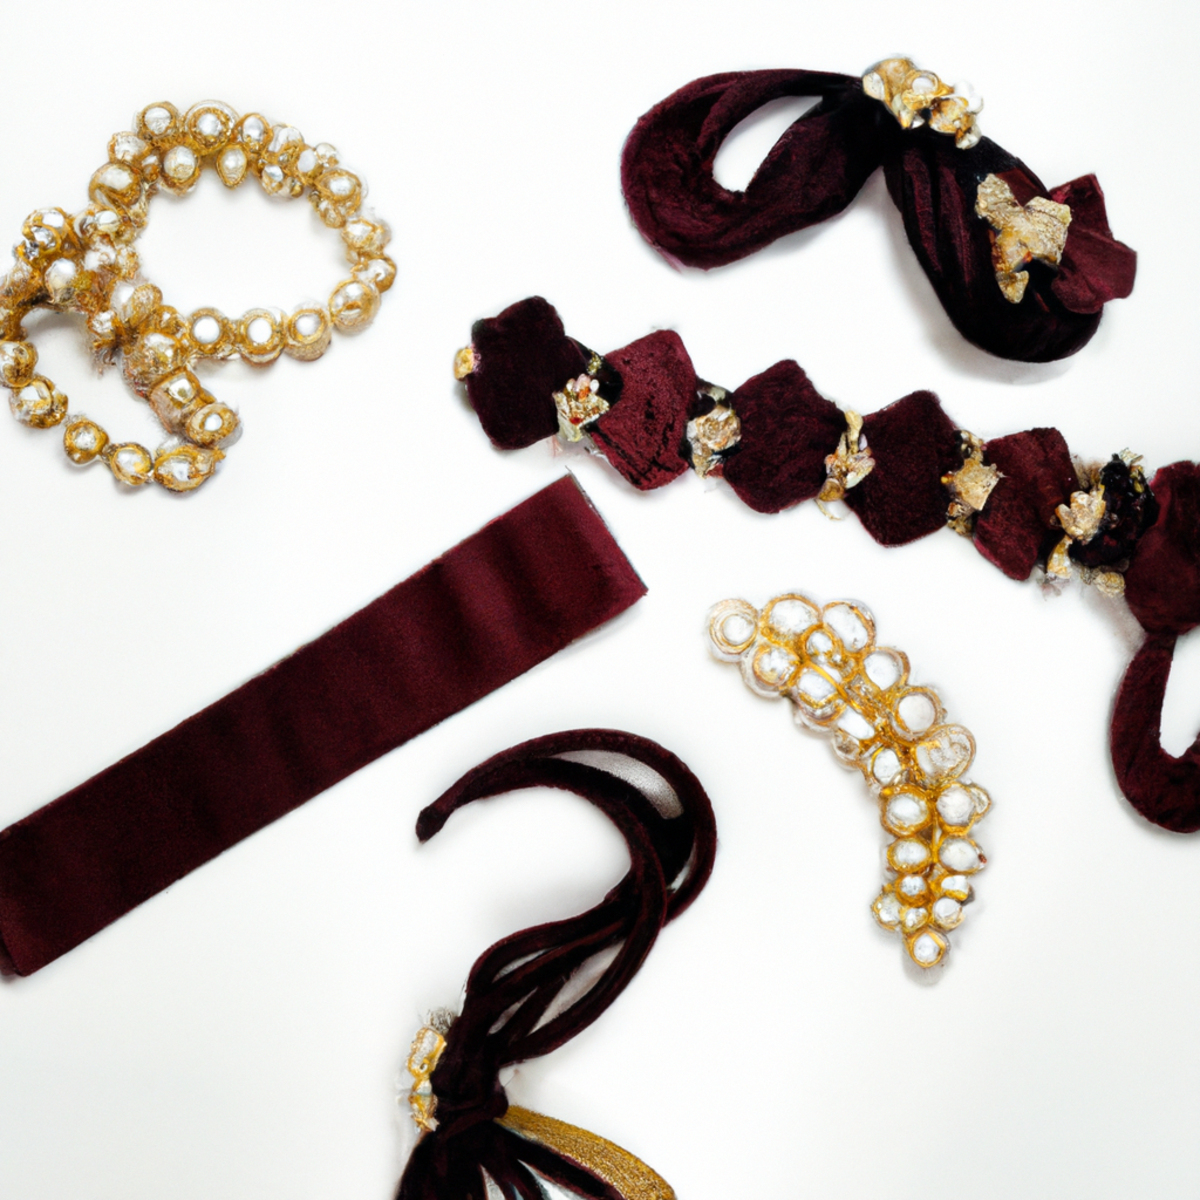 Trending hairstyles for 2023 - Assorted hair accessories including a gold clip, pearl pins, velvet scrunchie, black headband, clear tie, and colorful elastics.